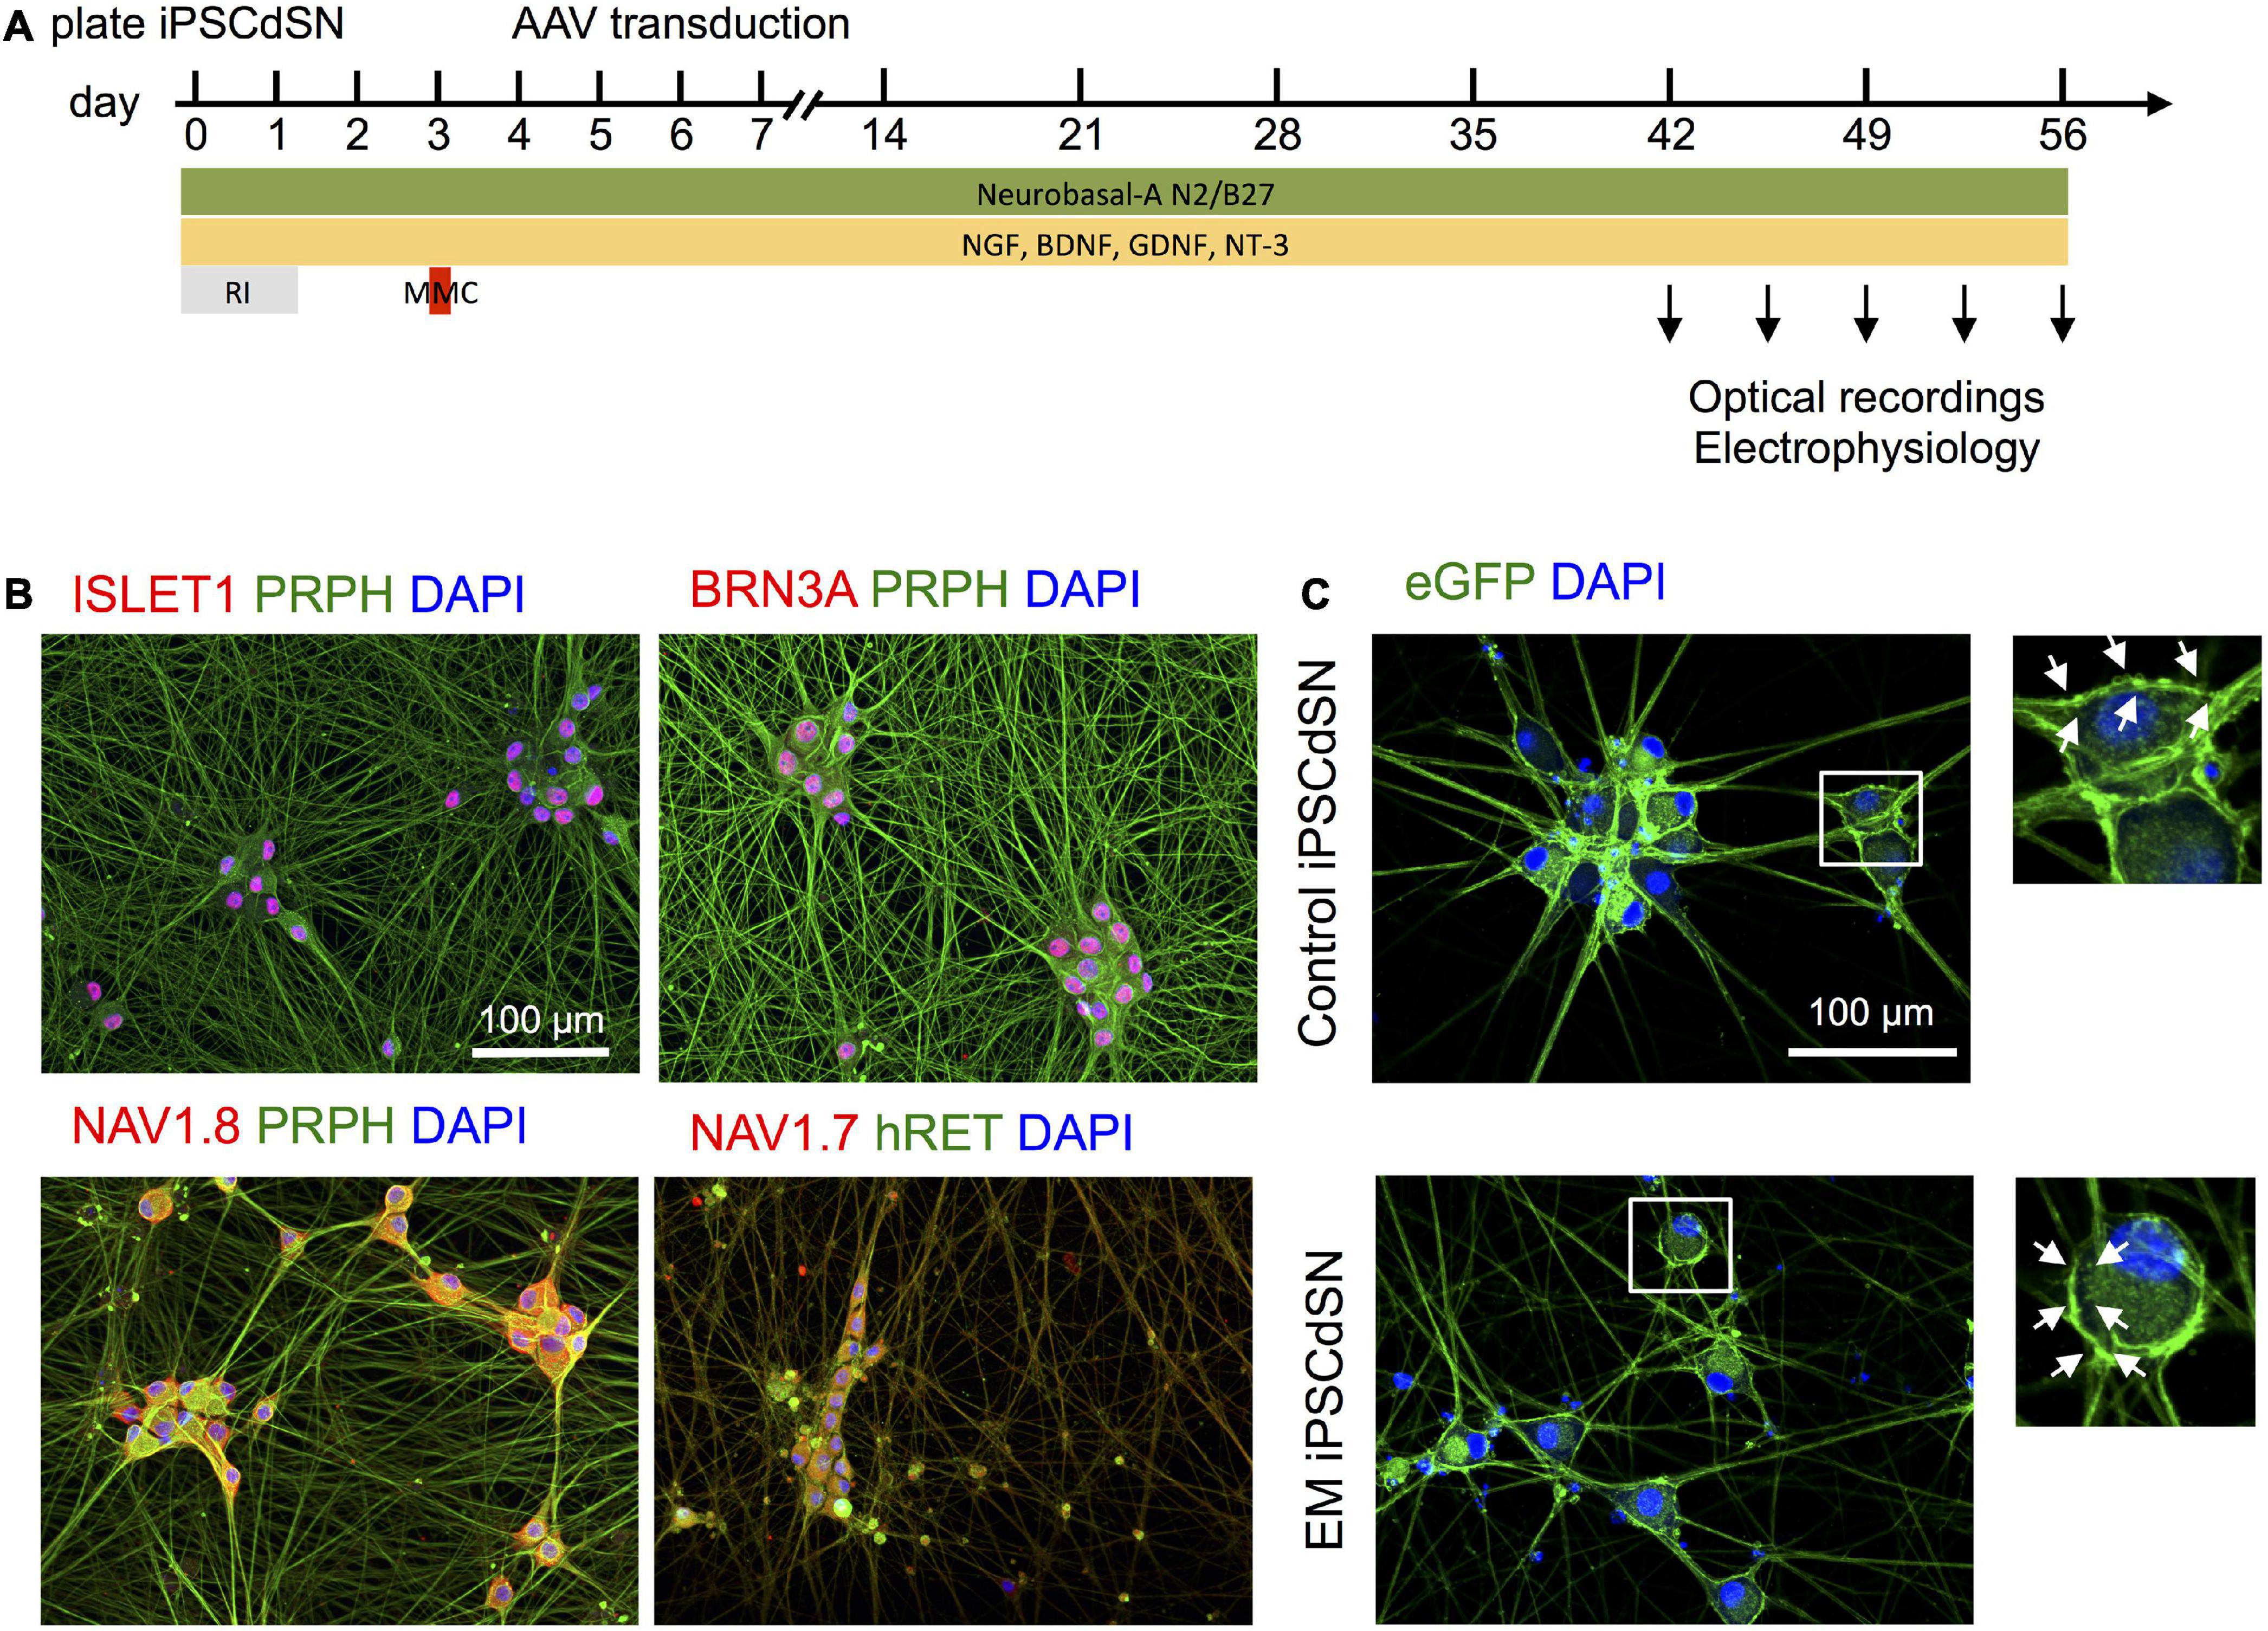 Bringing to light the physiological and pathological firing patterns of human induced pluripotent stem cell-derived neurons using optical recordings